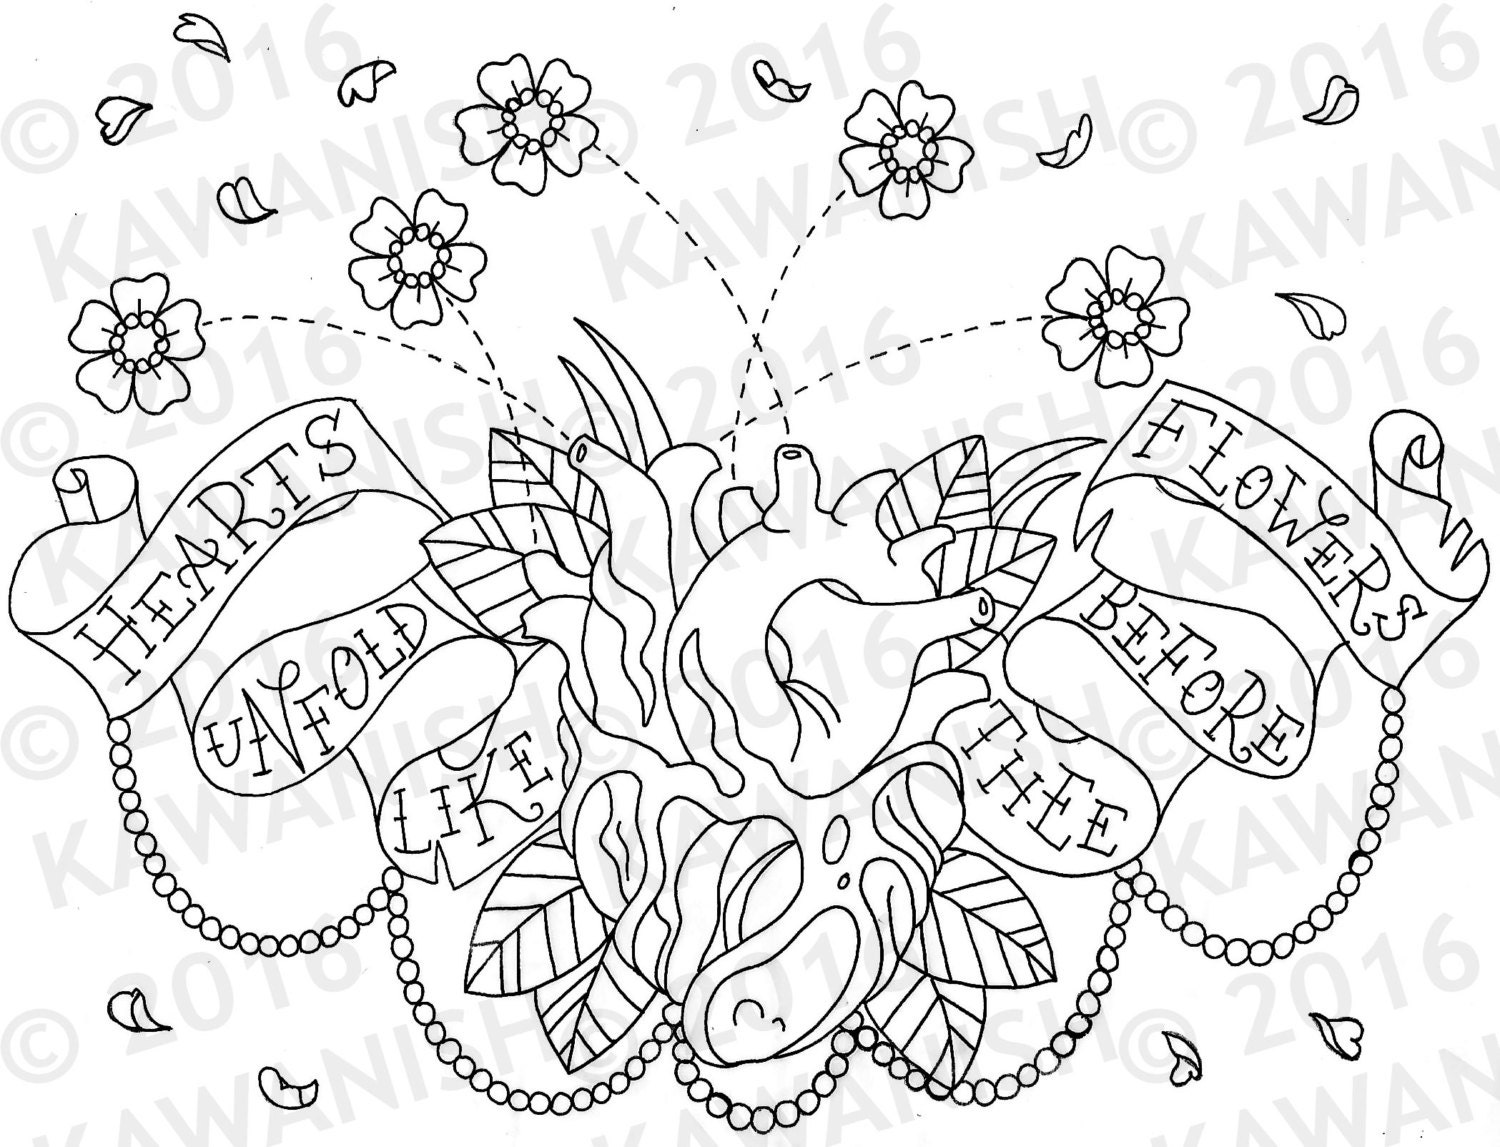 Ode to Joy Hymn Heart Flowers Floral Adult Coloring Page Gift